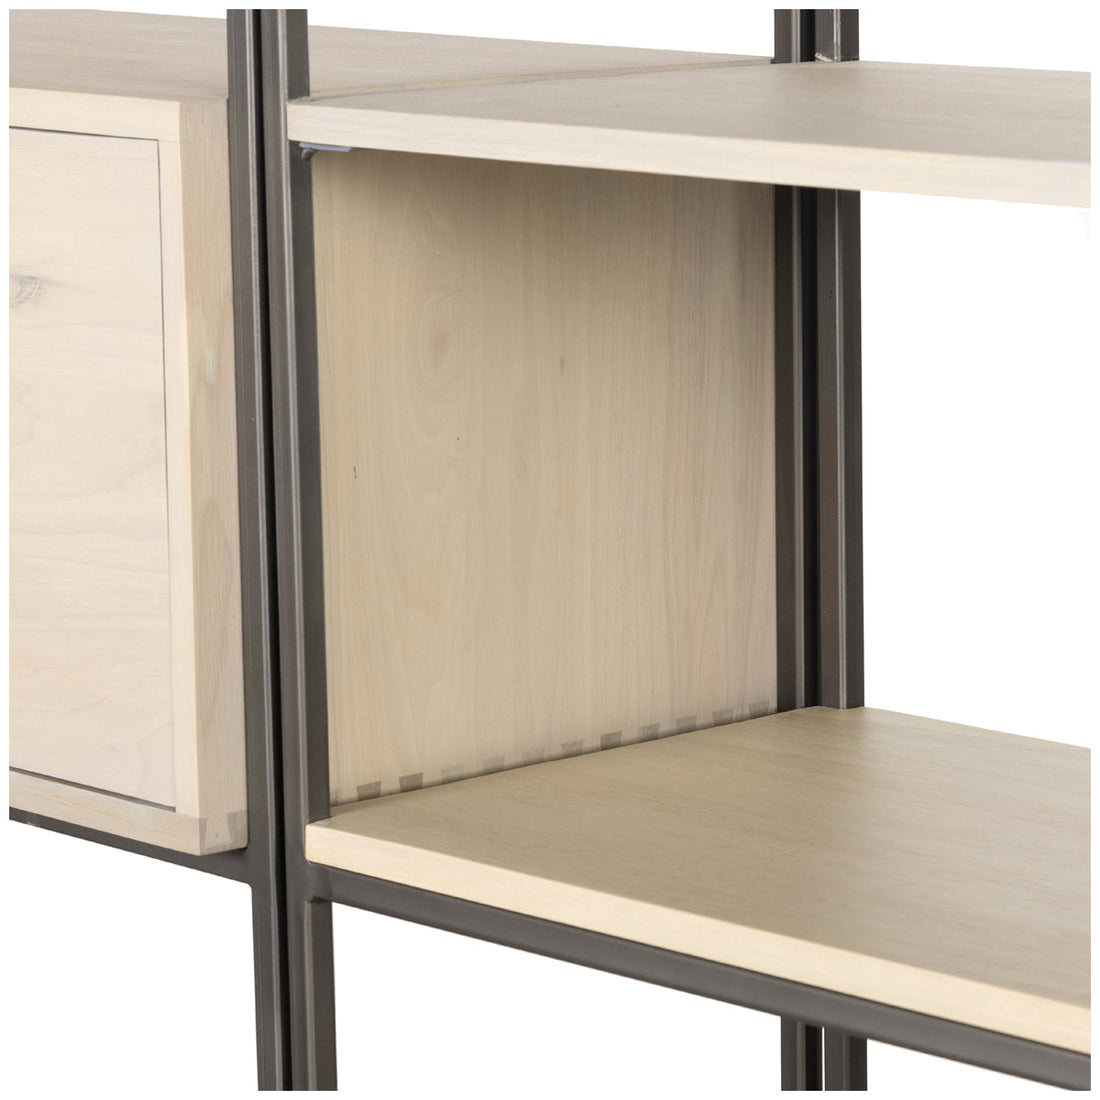 Four Hands Fulton Trey Modular Wall Desk with 2-Piece Bookcase - Dove